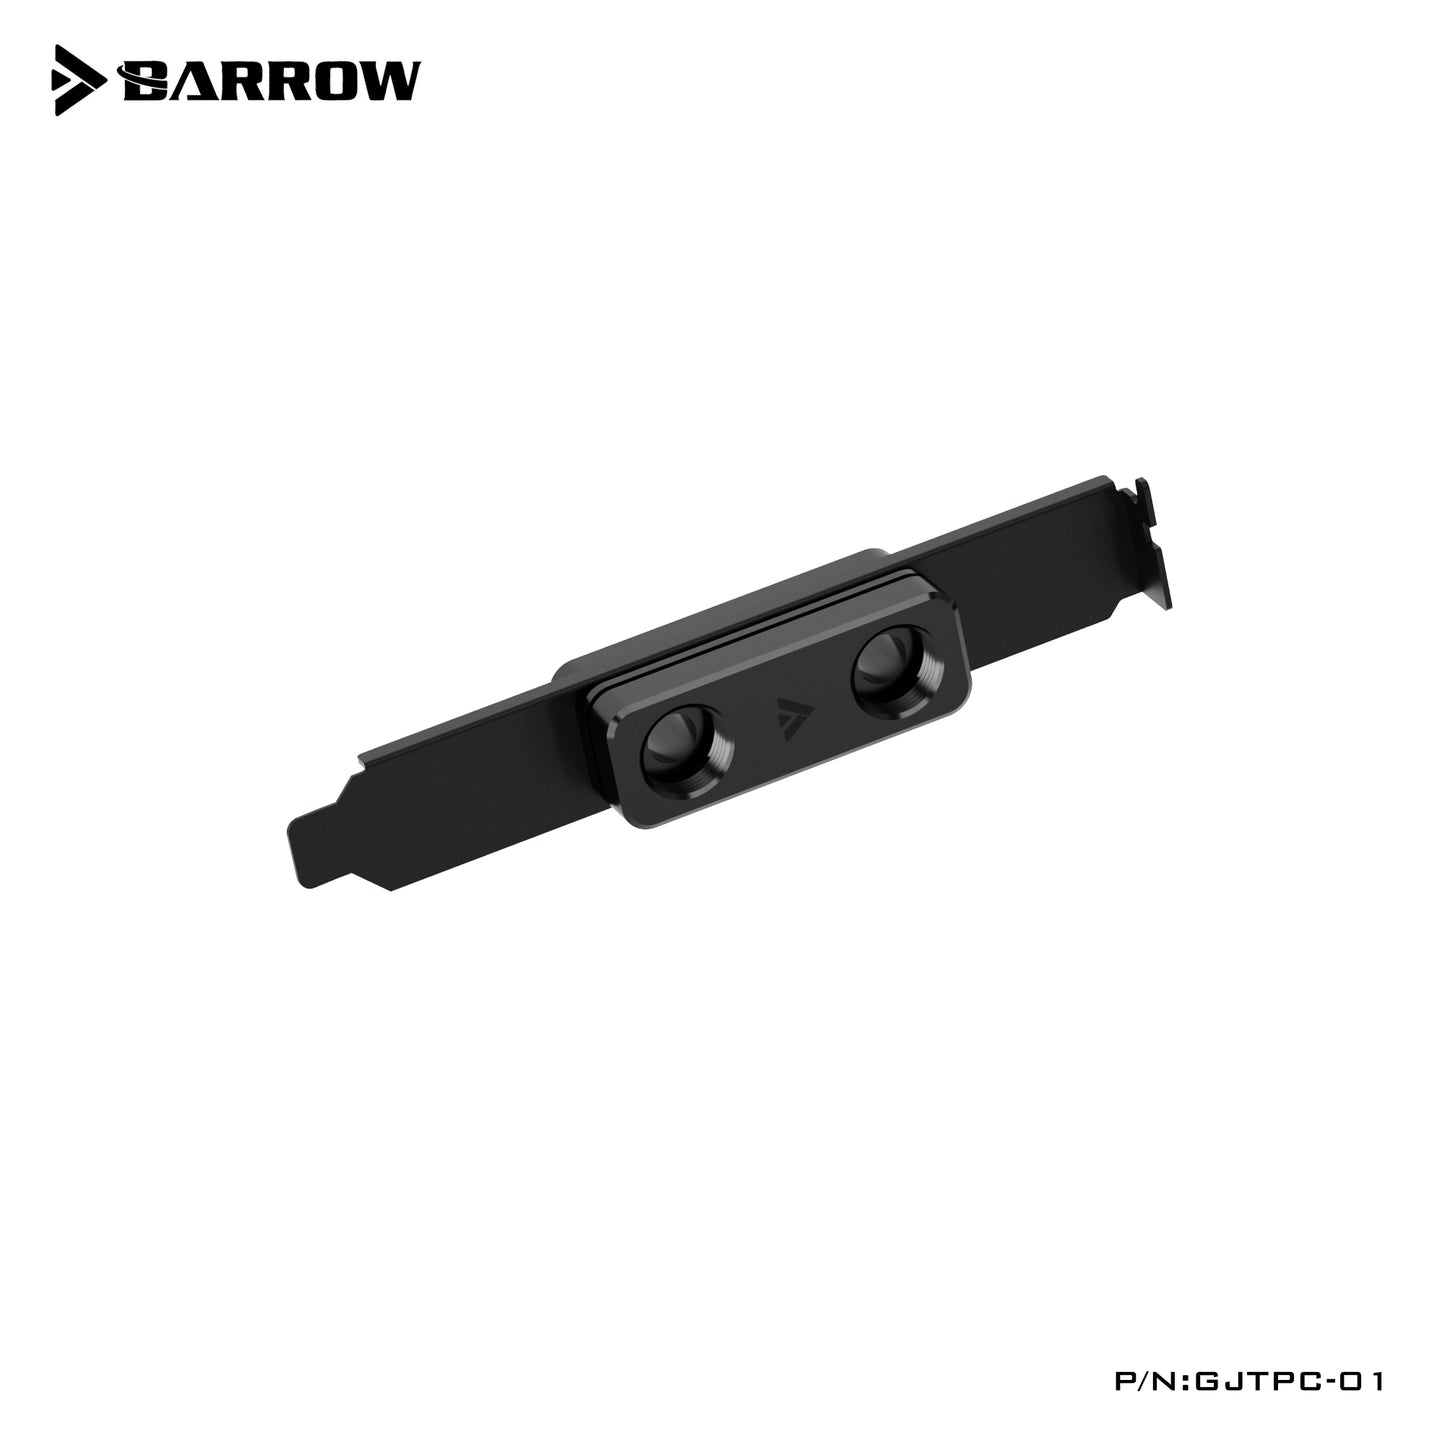 Barrow PCI-E Baffle With Crossing With G1/4" Ports, Modular For External Equipment And Tubeway Layout, Connection For Through Case Wall, Water Cooling Modify Accessory, GJTPC-01